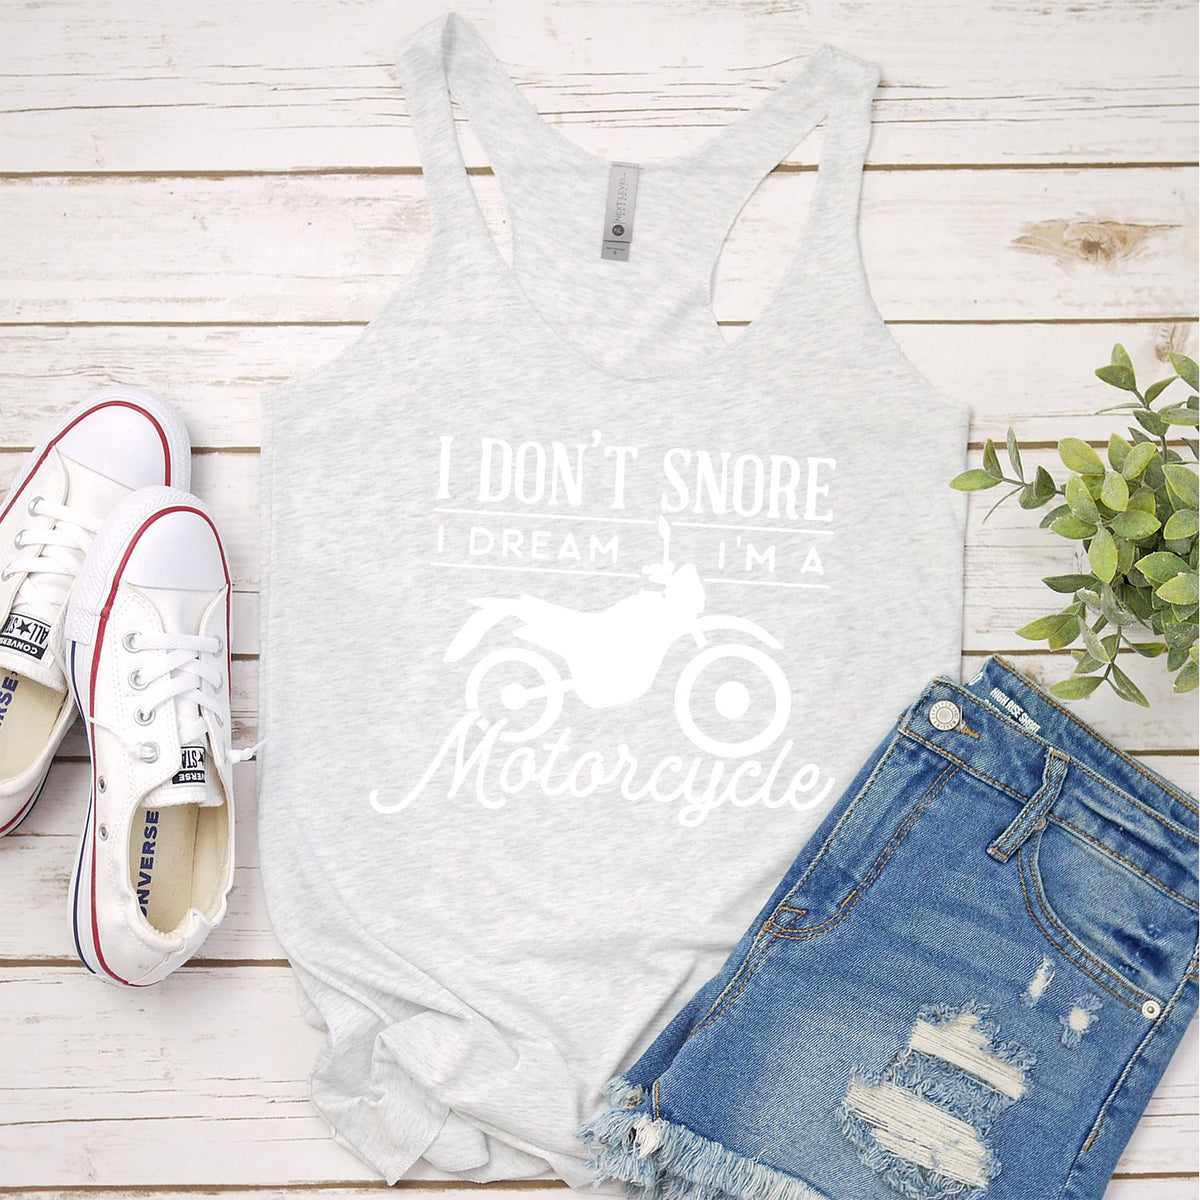 I Don&#39;t Snore I Dream I&#39;m A Motorcycle - Tank Top Racerback